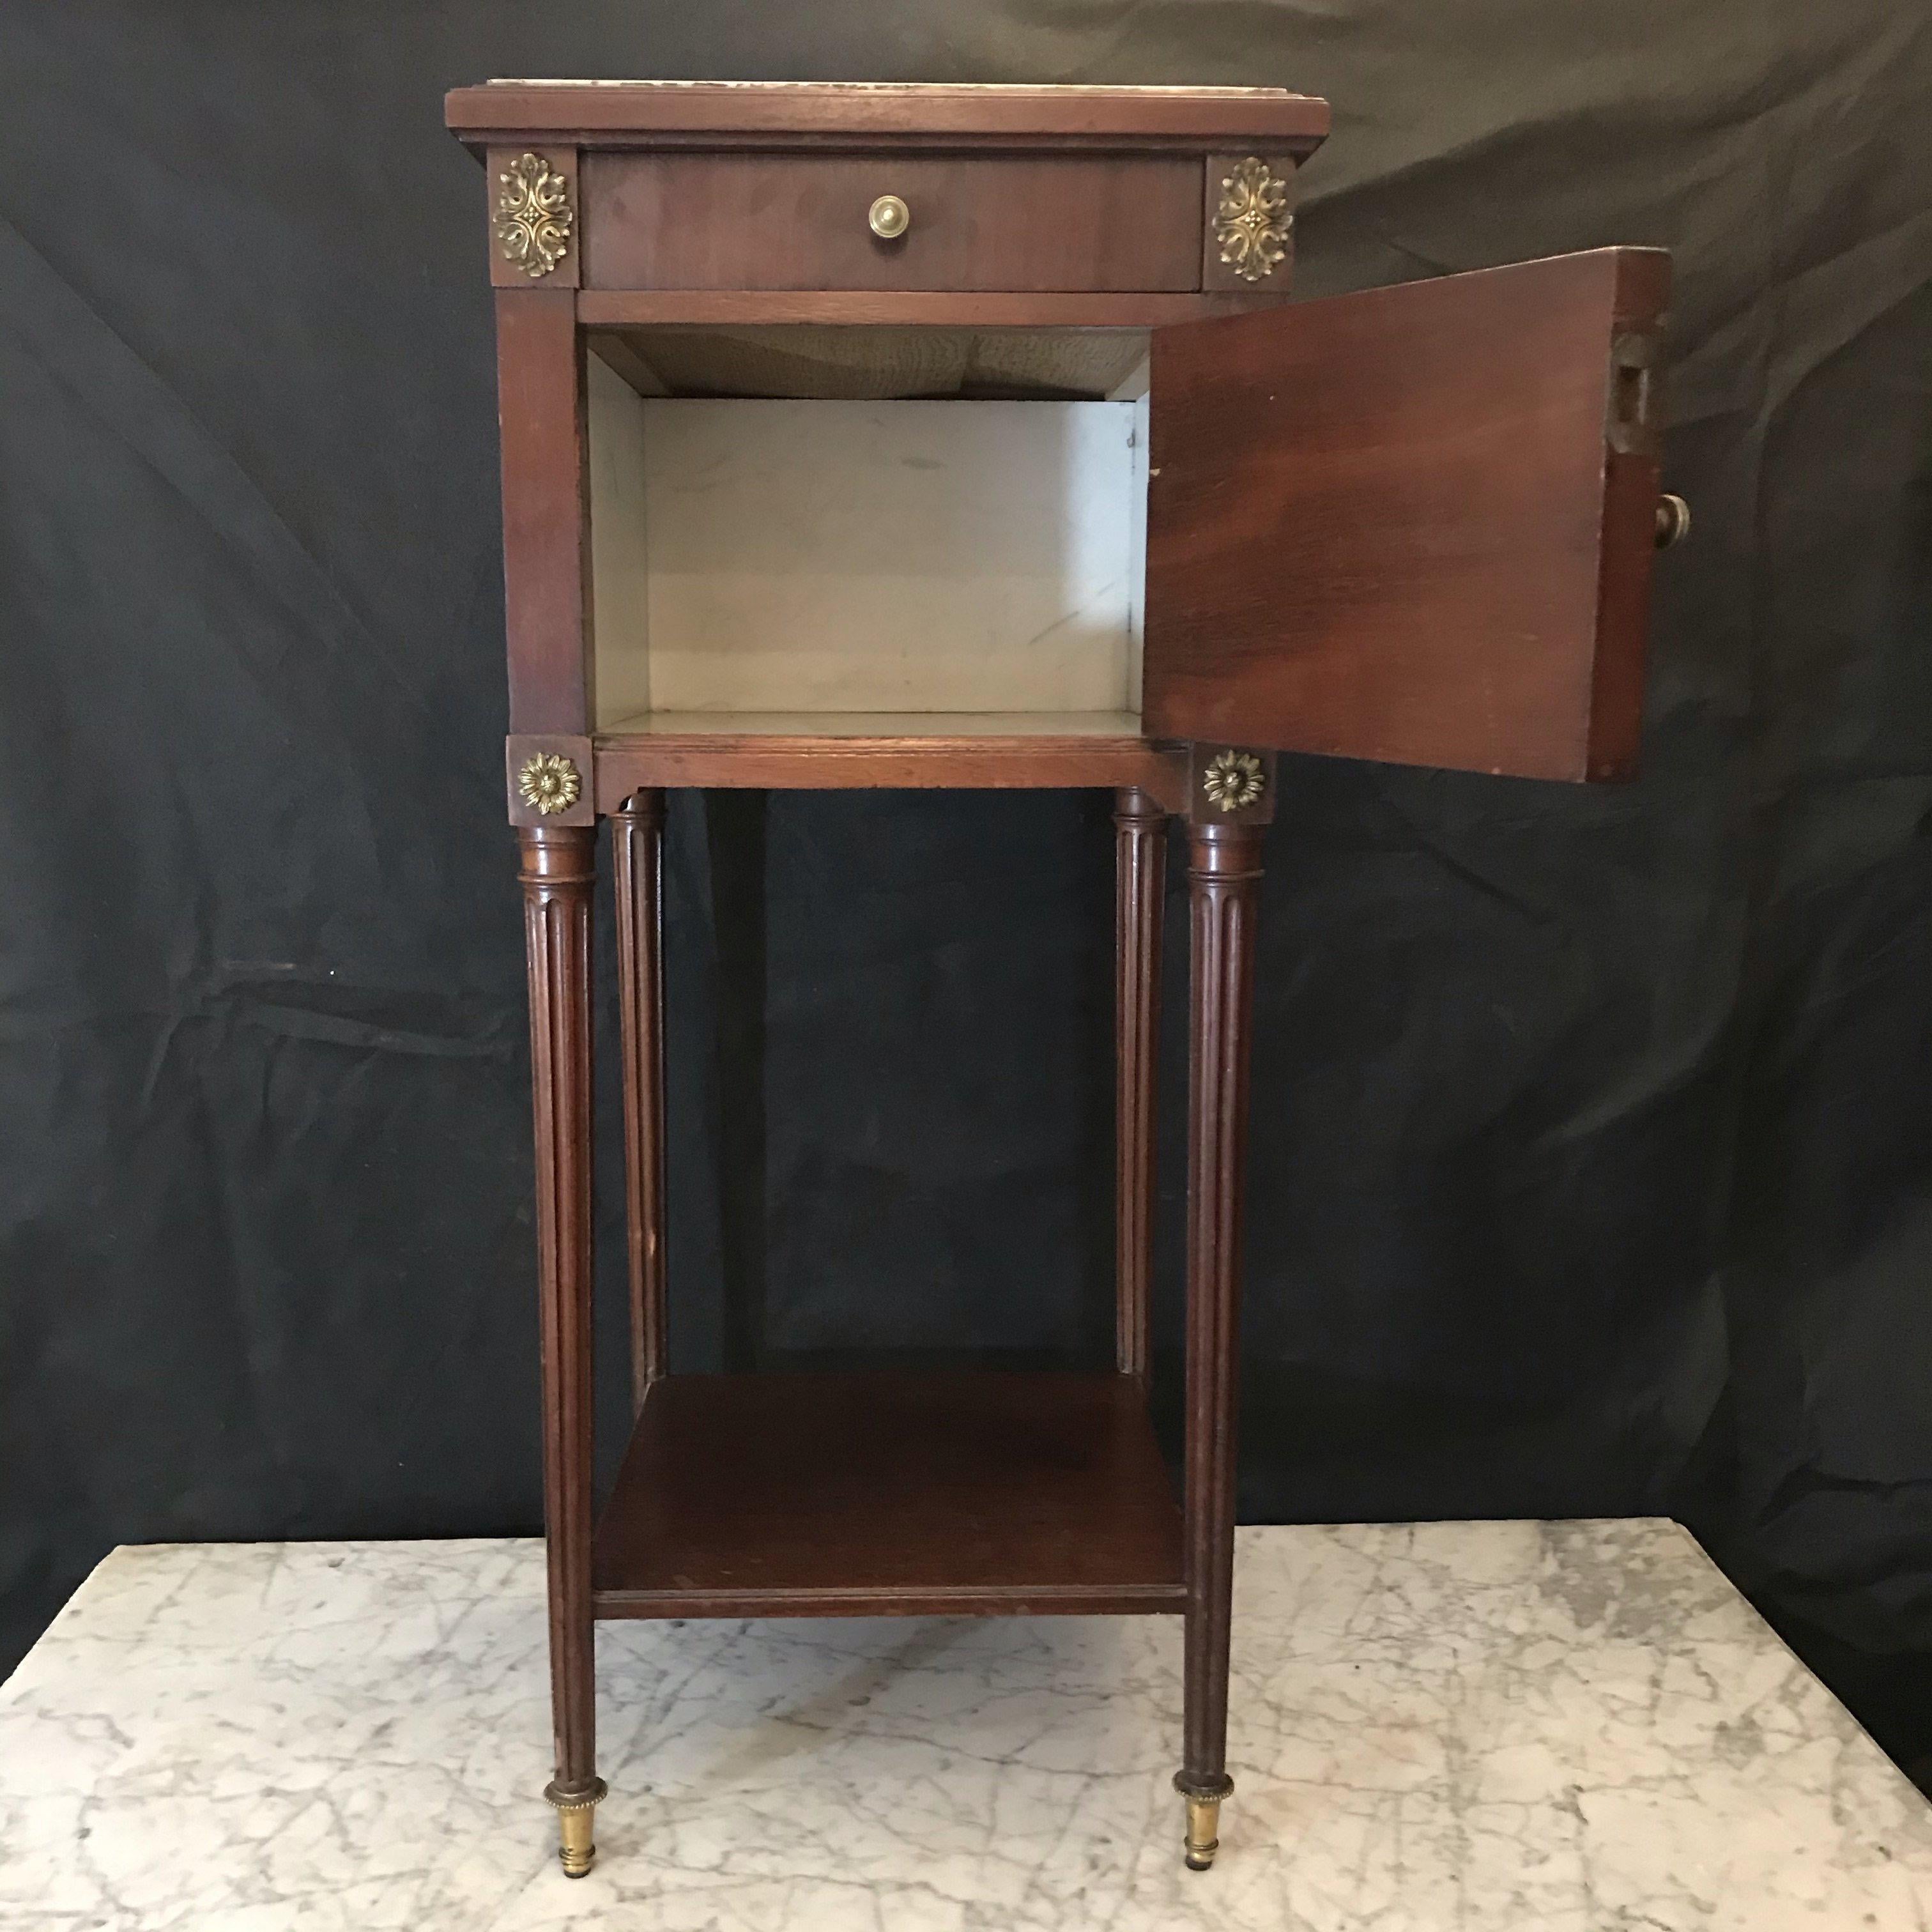 A smart Louis XVI walnut nightstand cabinet or end table with Carrara marble top and interior having a drawer for storage and lower shelf. The cabinet body has squared corners with gilded fluting and solid sides. The drawer and cabinet have